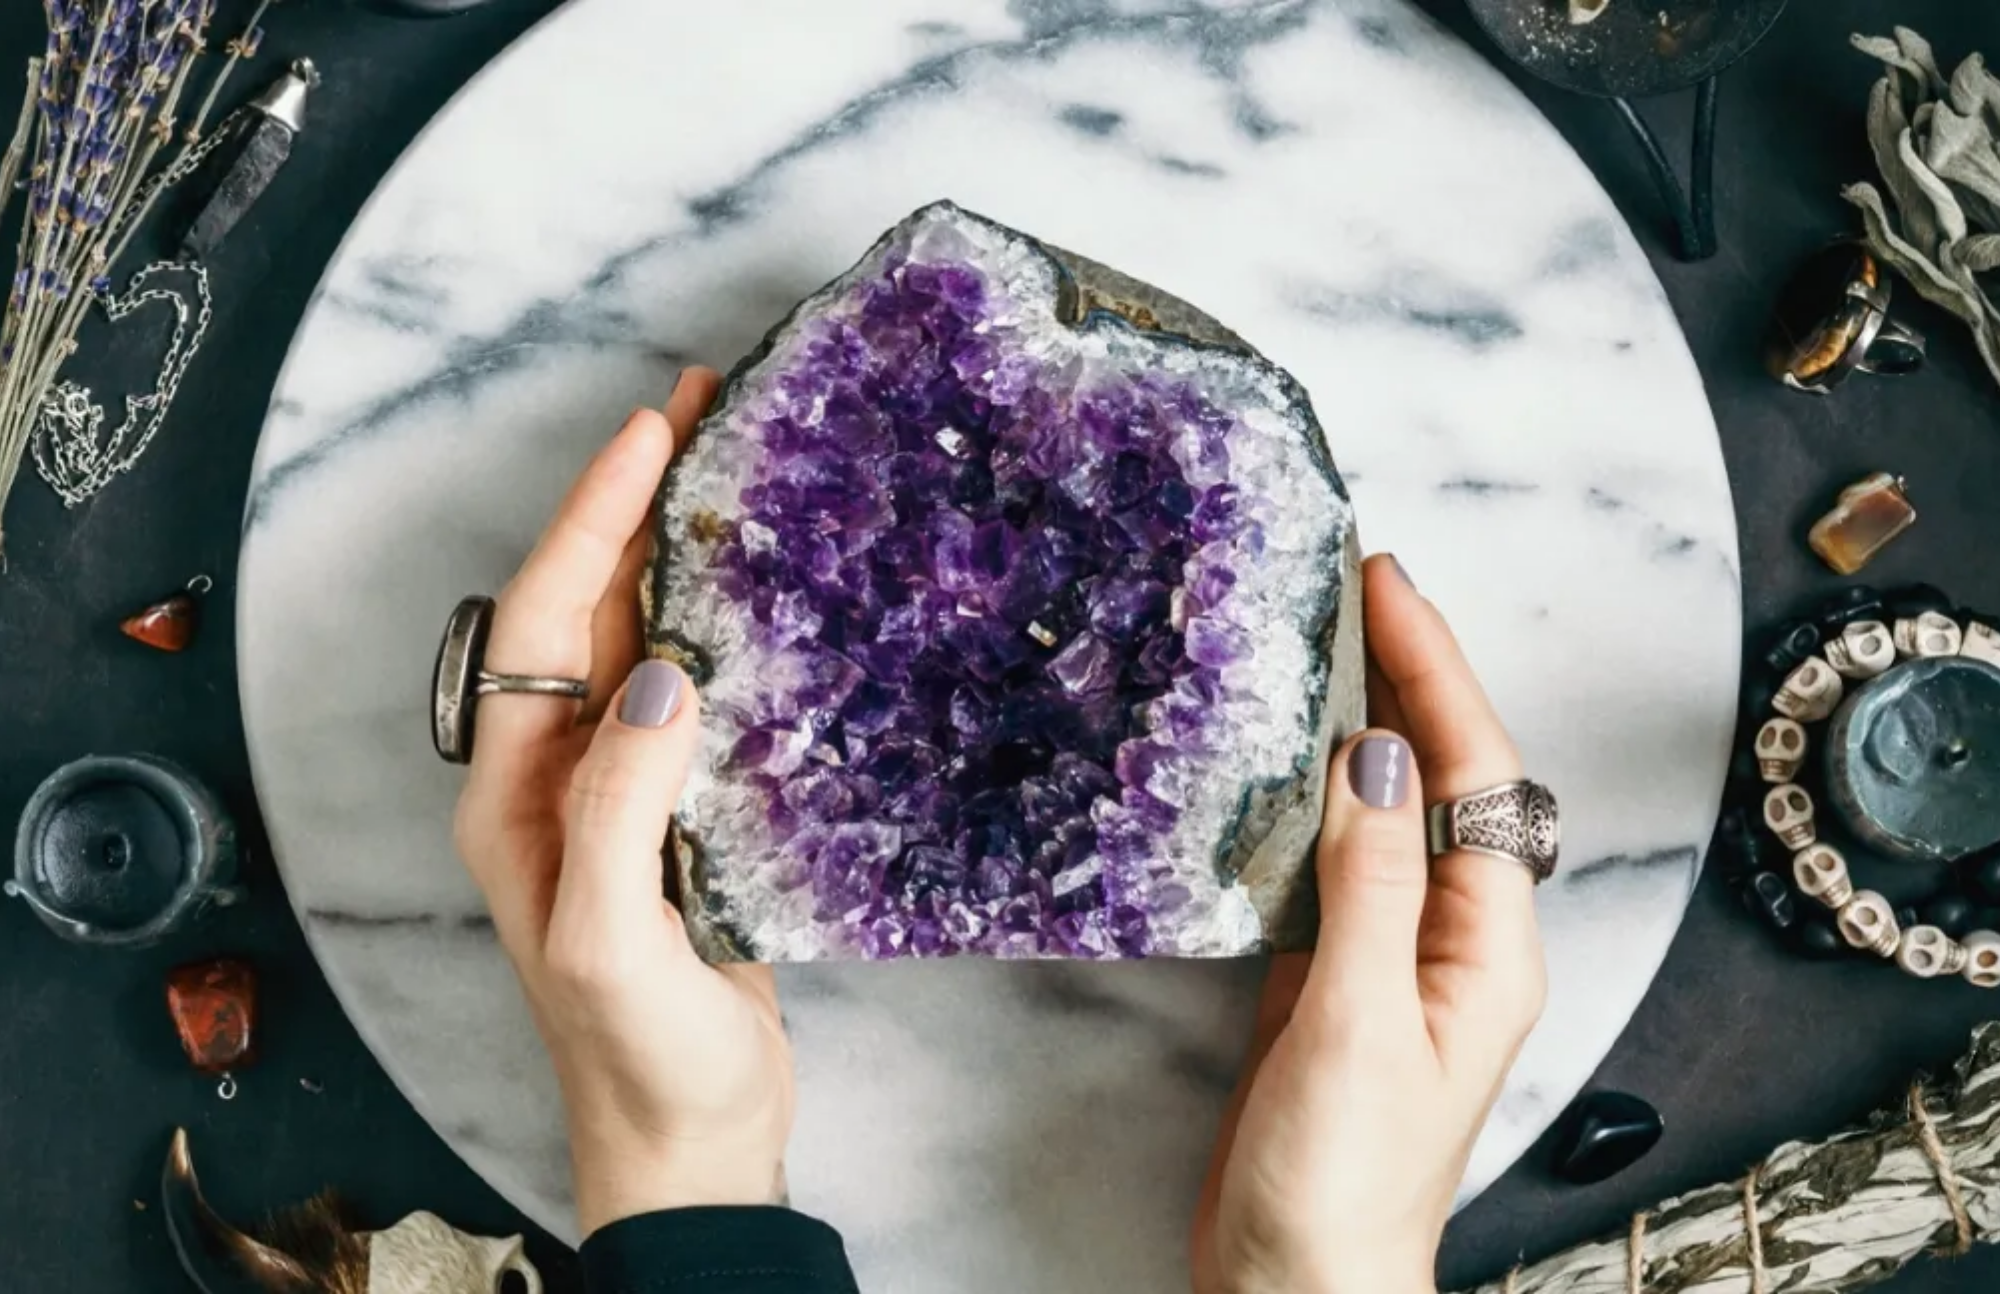 An amethyst stone on a table carried by a woman, as well as several items for healing activities